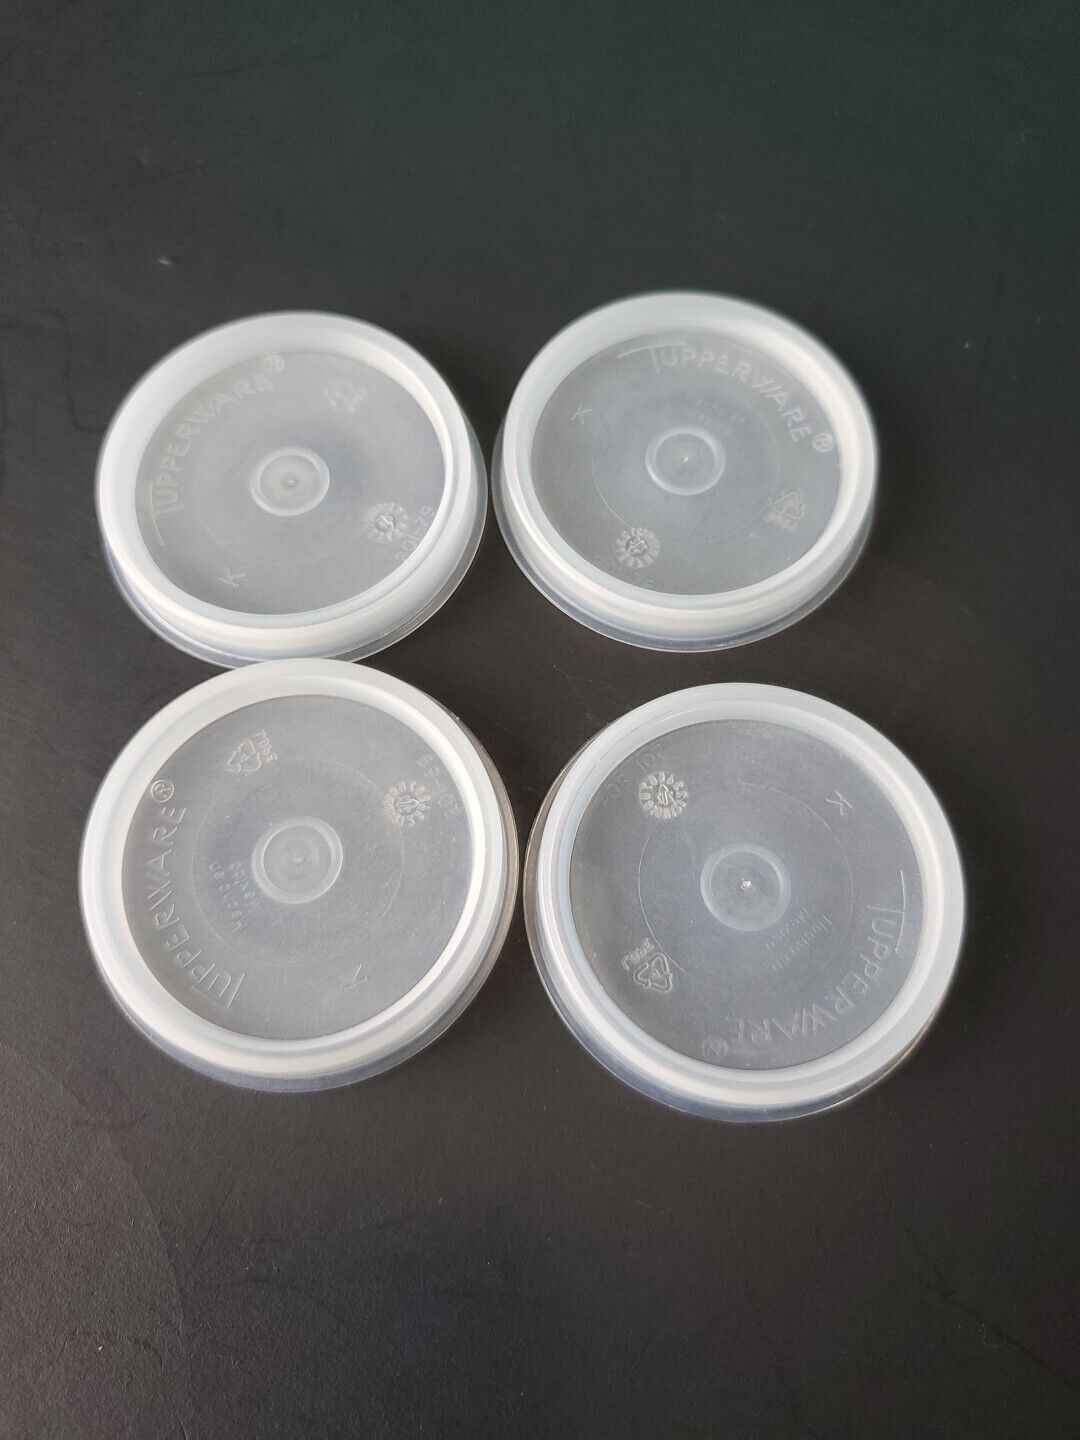 Tupperware Replacement Seals for Smidgets And Midget Containers #201 Sheer Sale